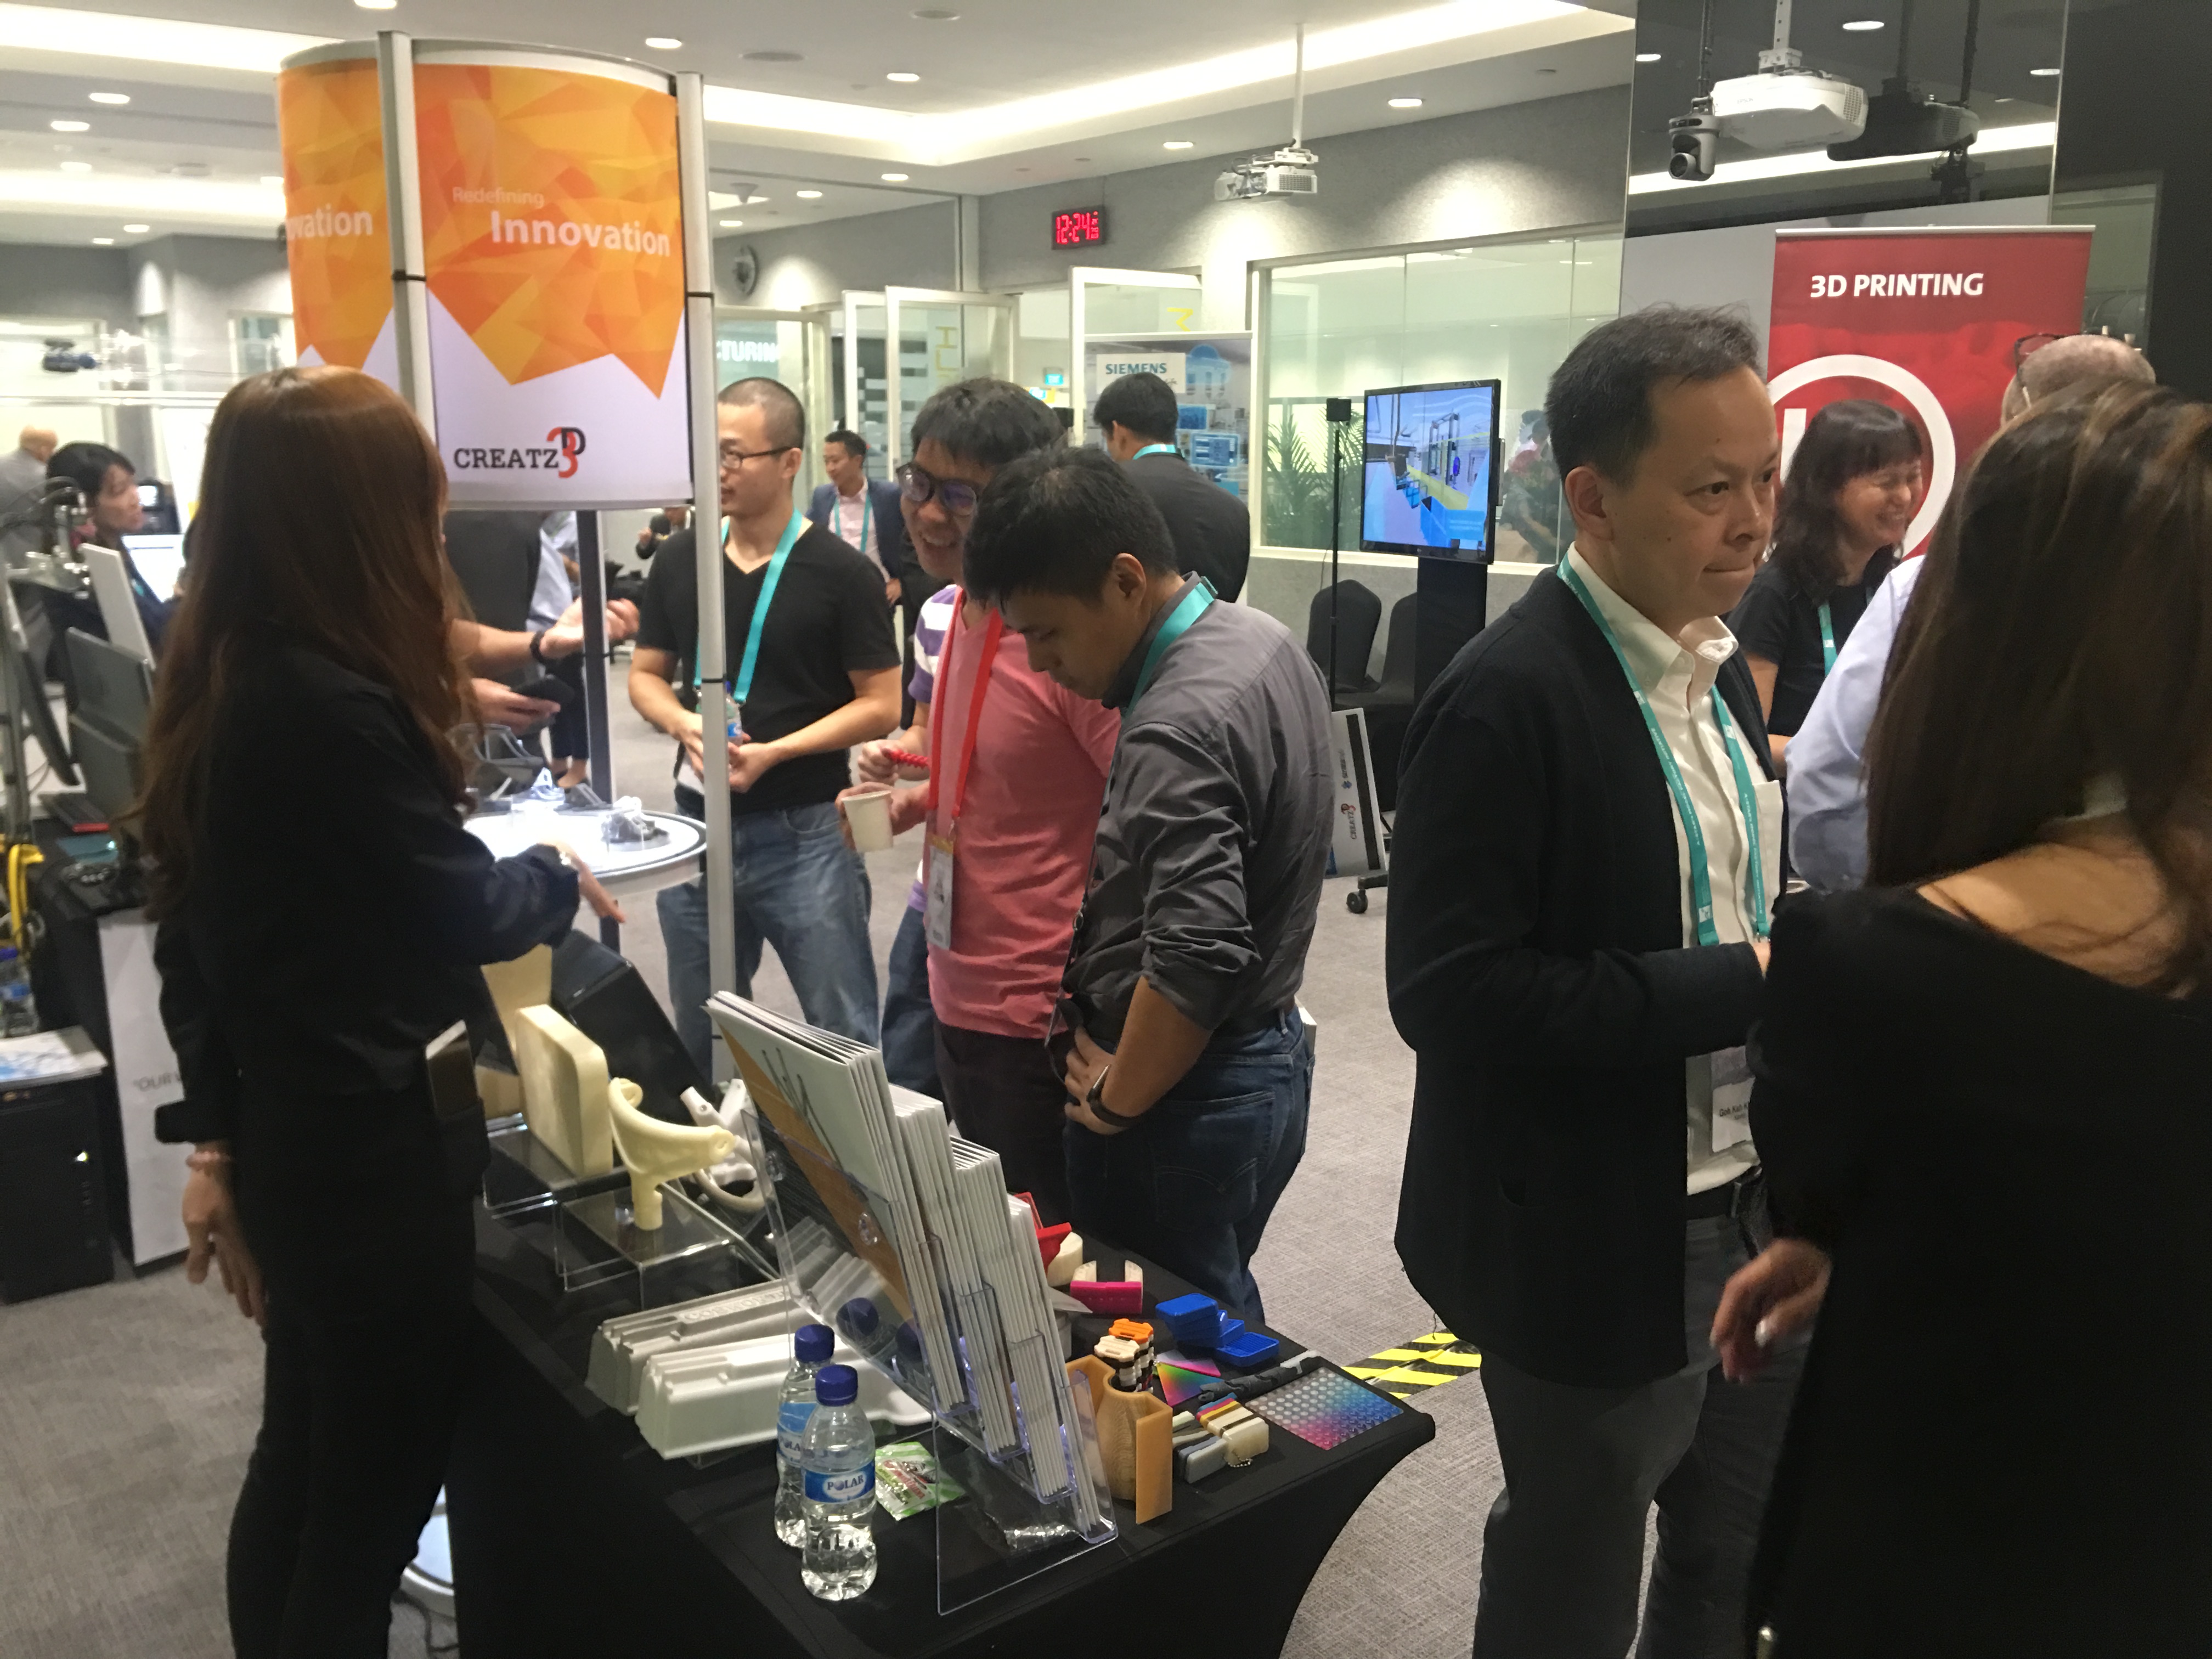 Visitors learning about 3D printing solutions at Creatz3D's booth at ARTC Model Factory launch event